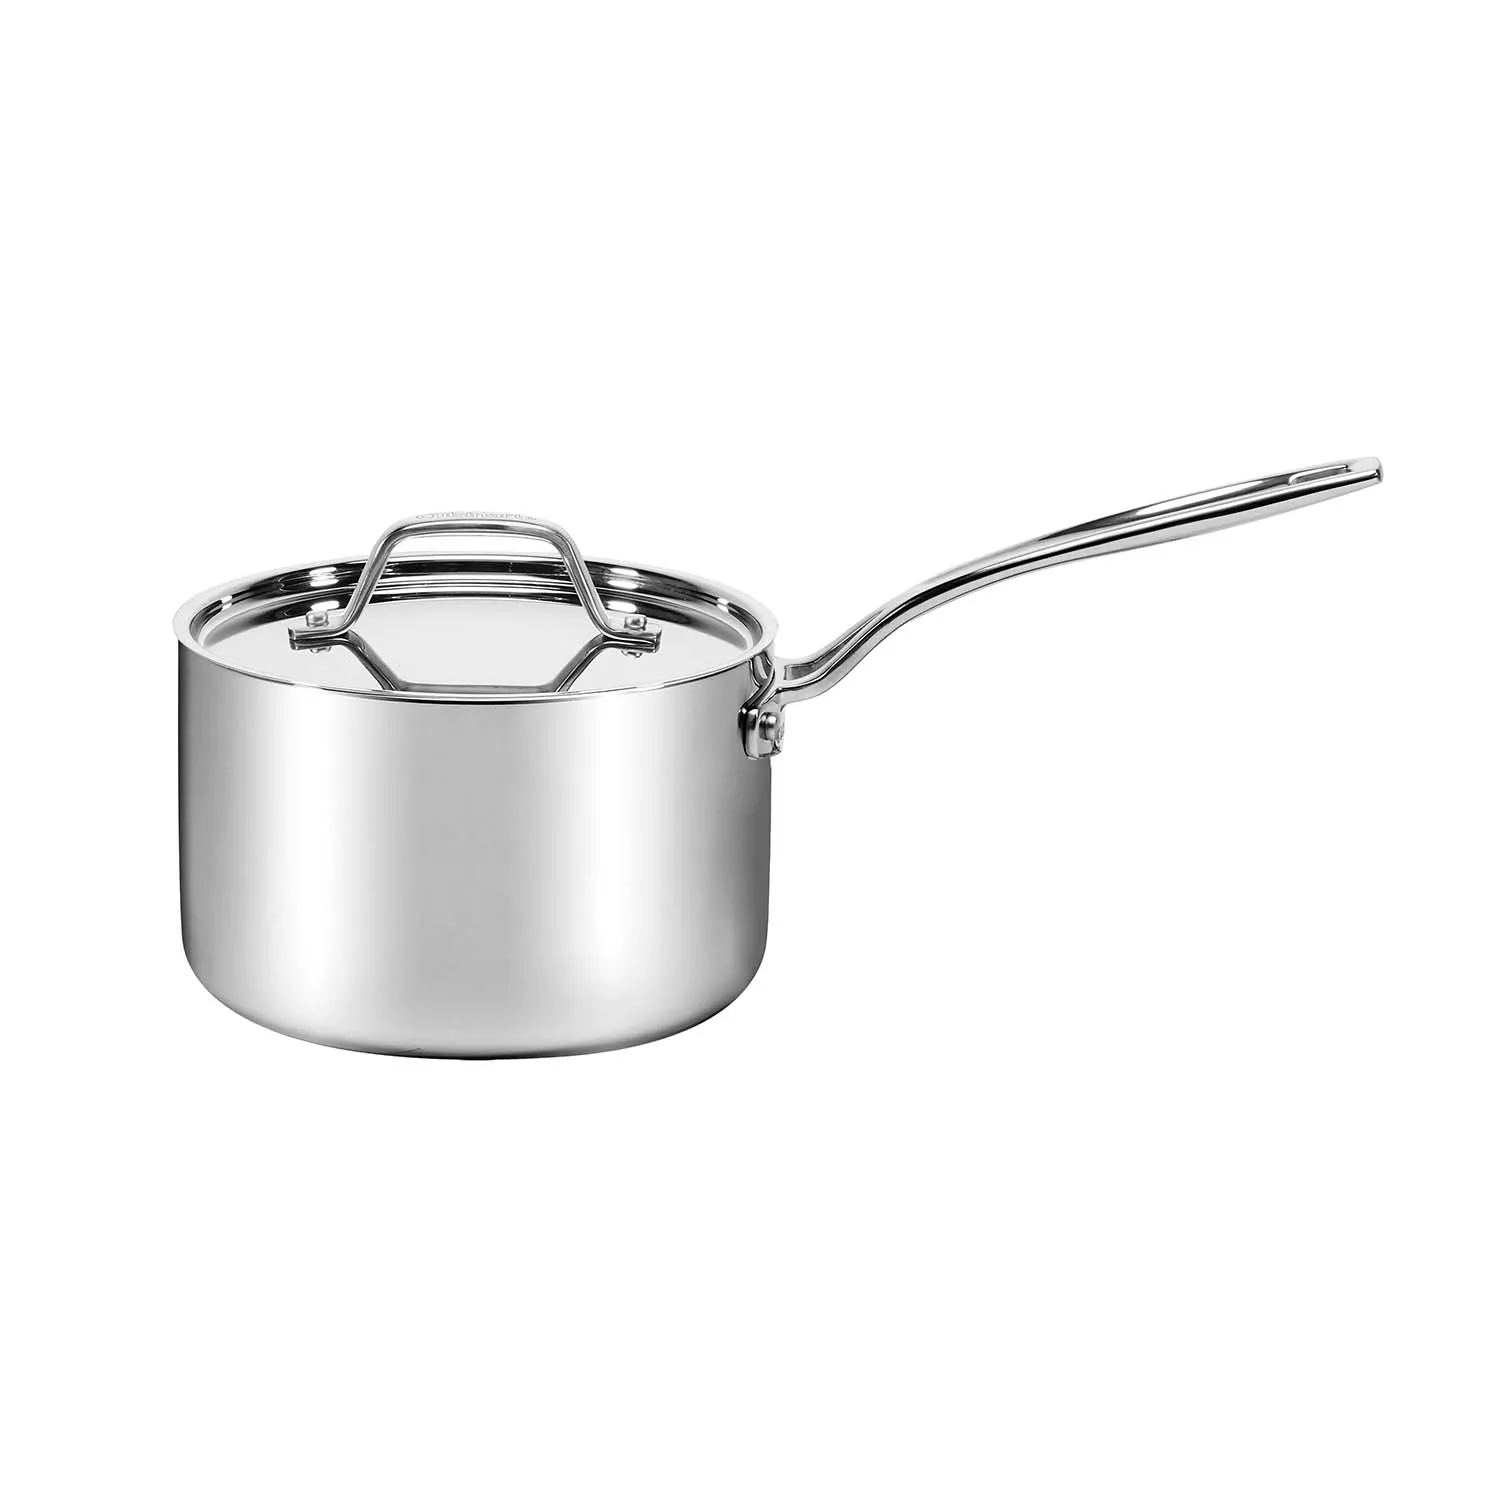 Cuisinart Advantage® Pro Premium Stainless-Steel Cookware 2.5 Qt. Saucepan  with Cover, 92195-18 